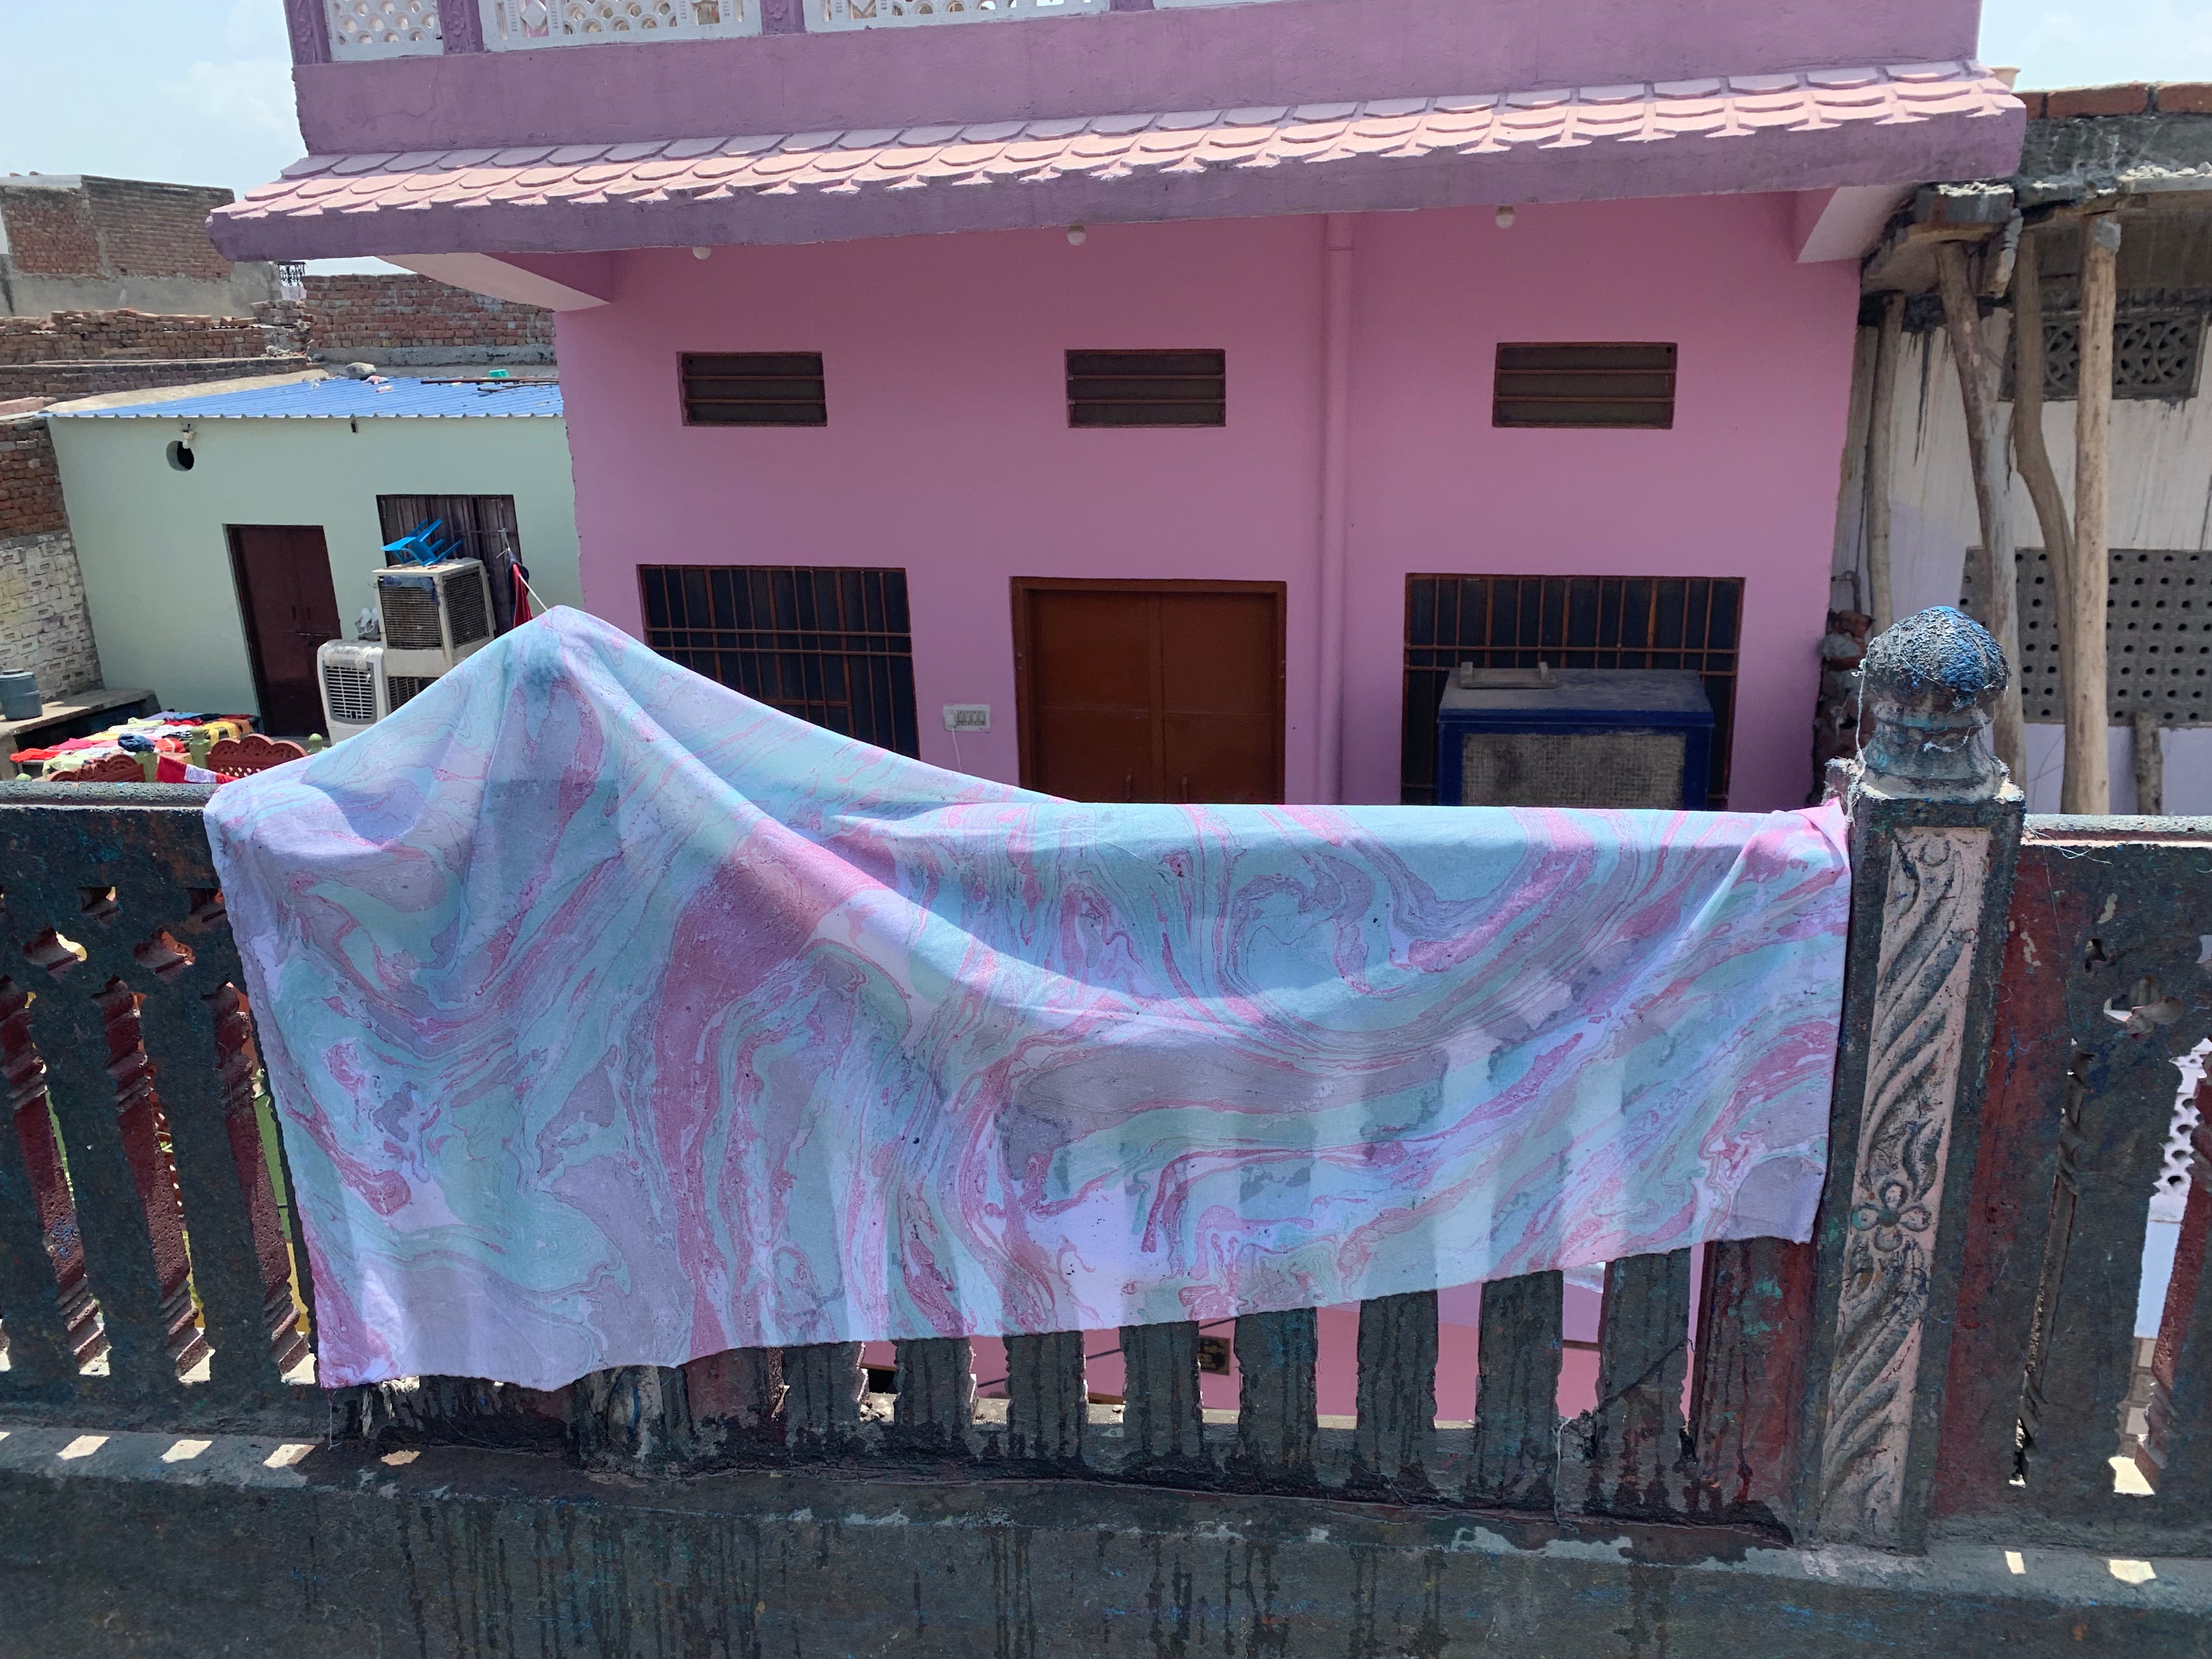 Fabric, infused with a tie-dye patten, dries outside on a stone fence next to an artisan facility